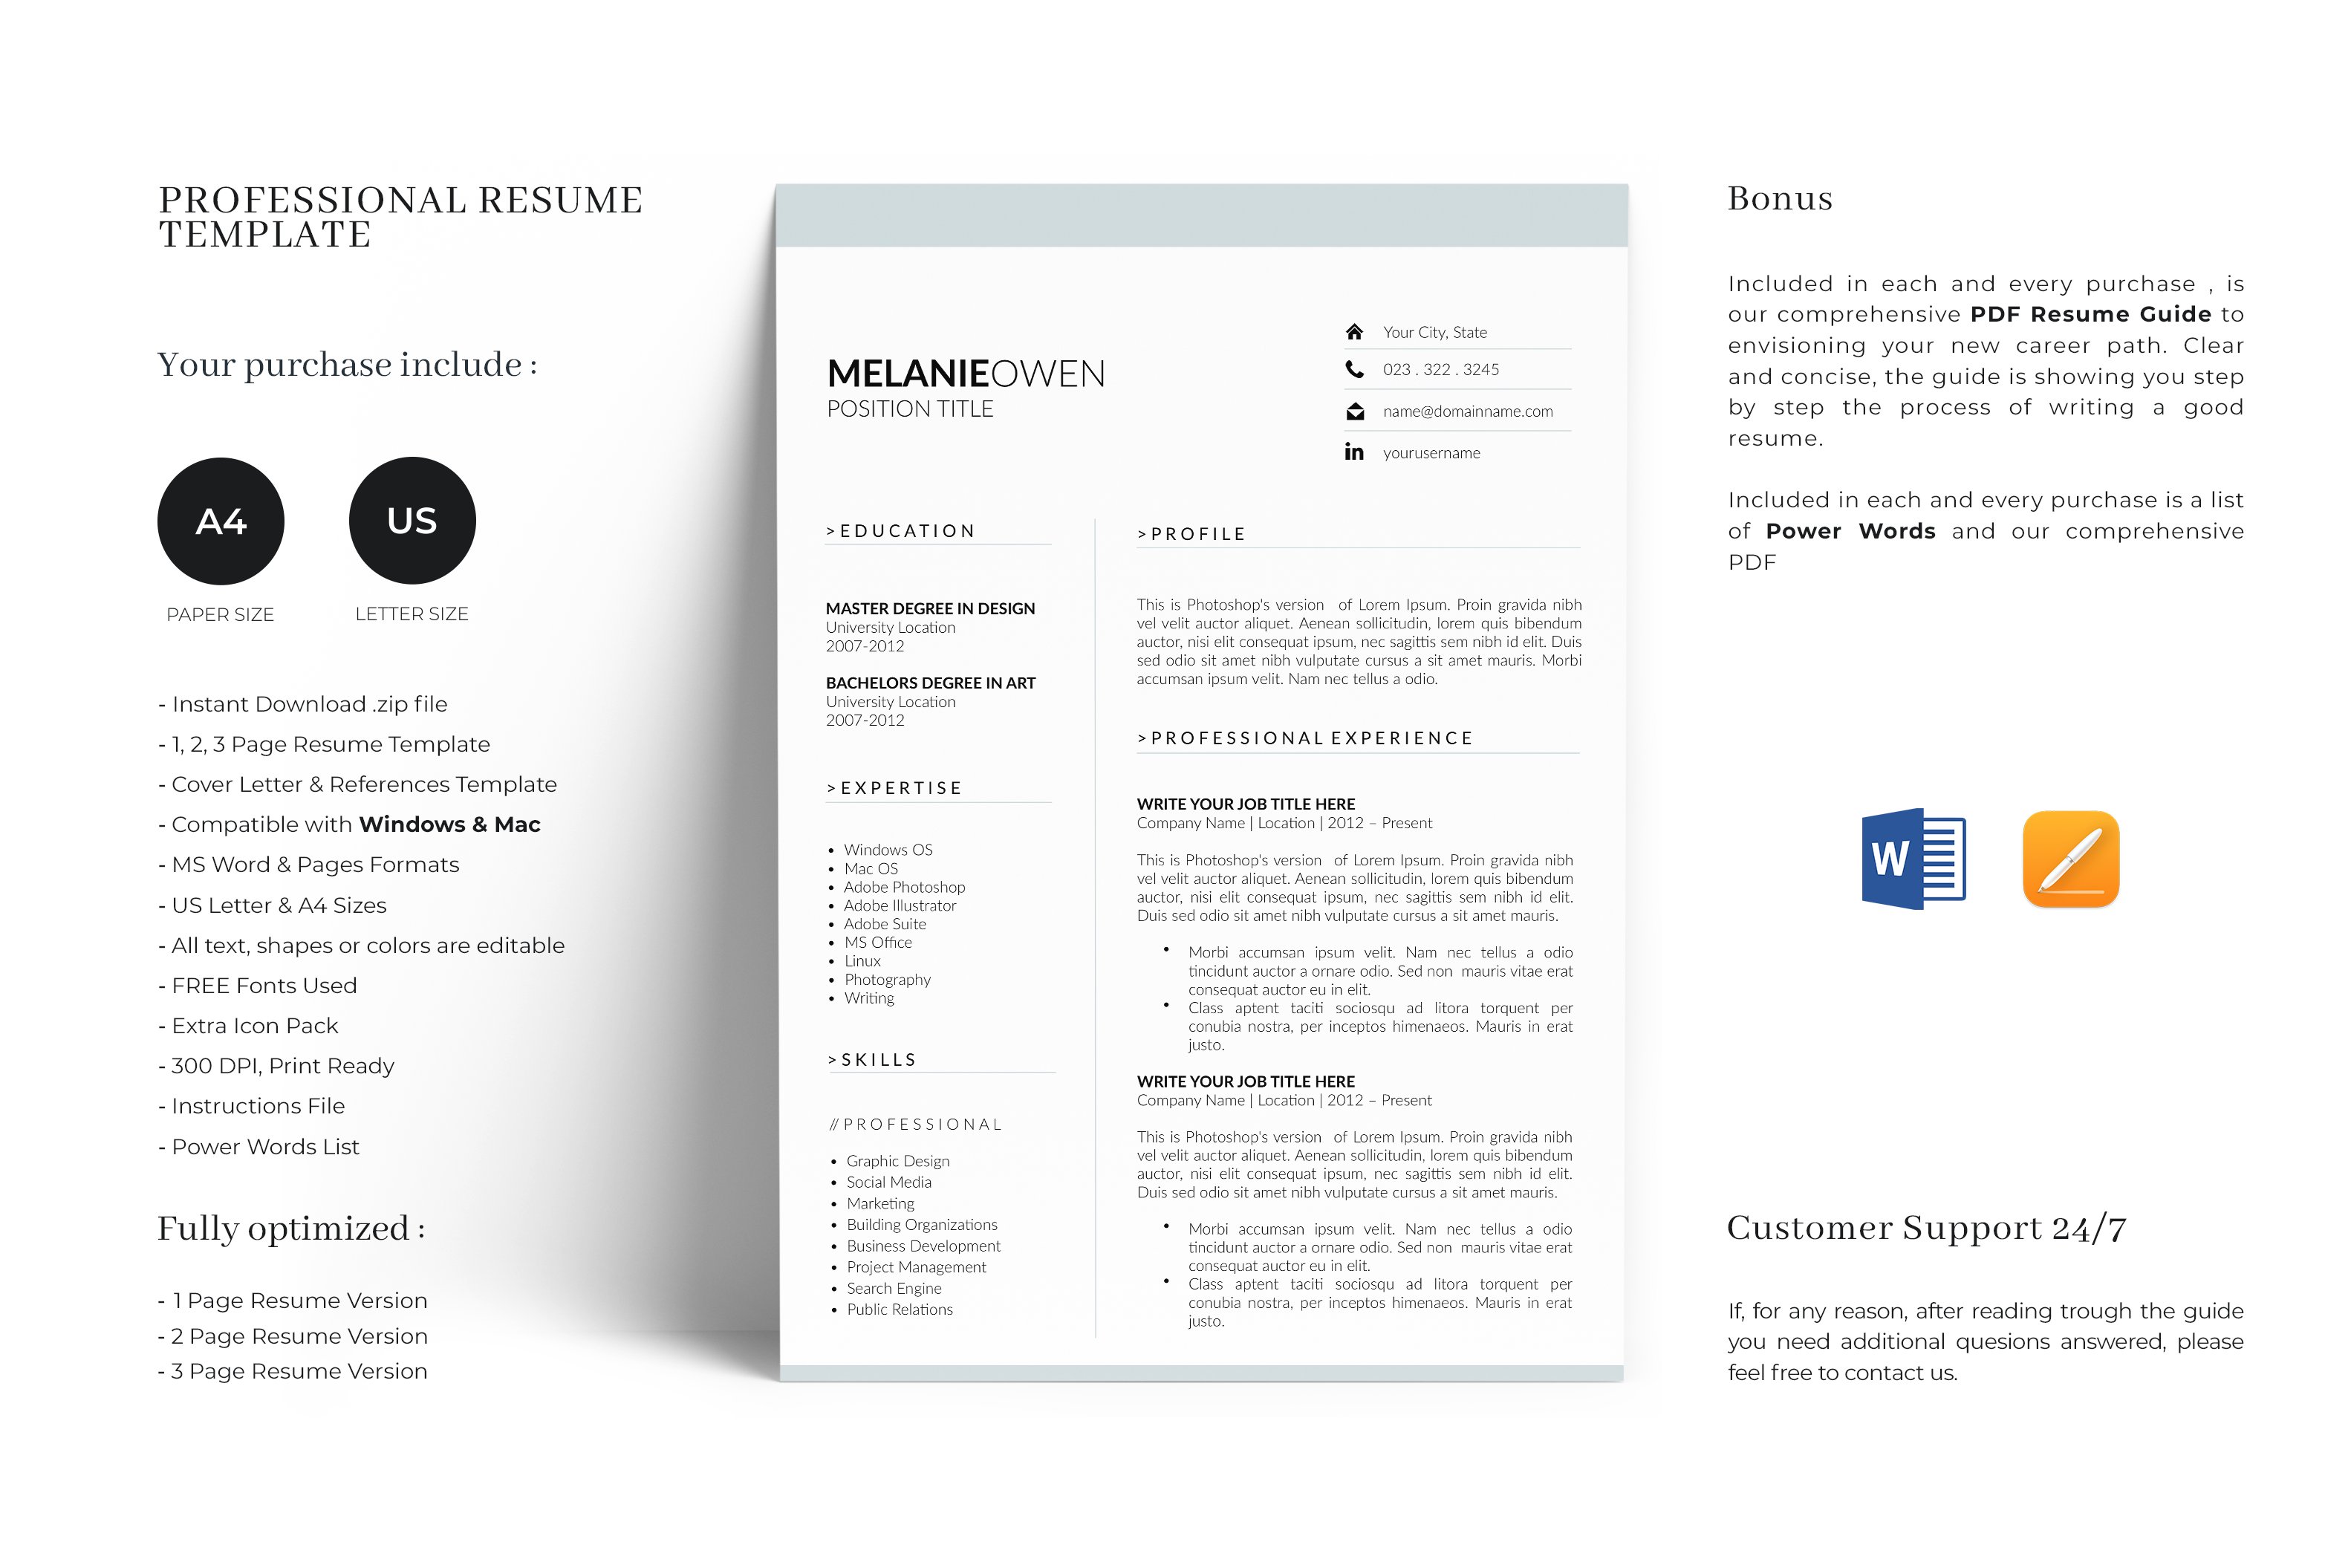 Customizable 5 Page Resume Template cover image.